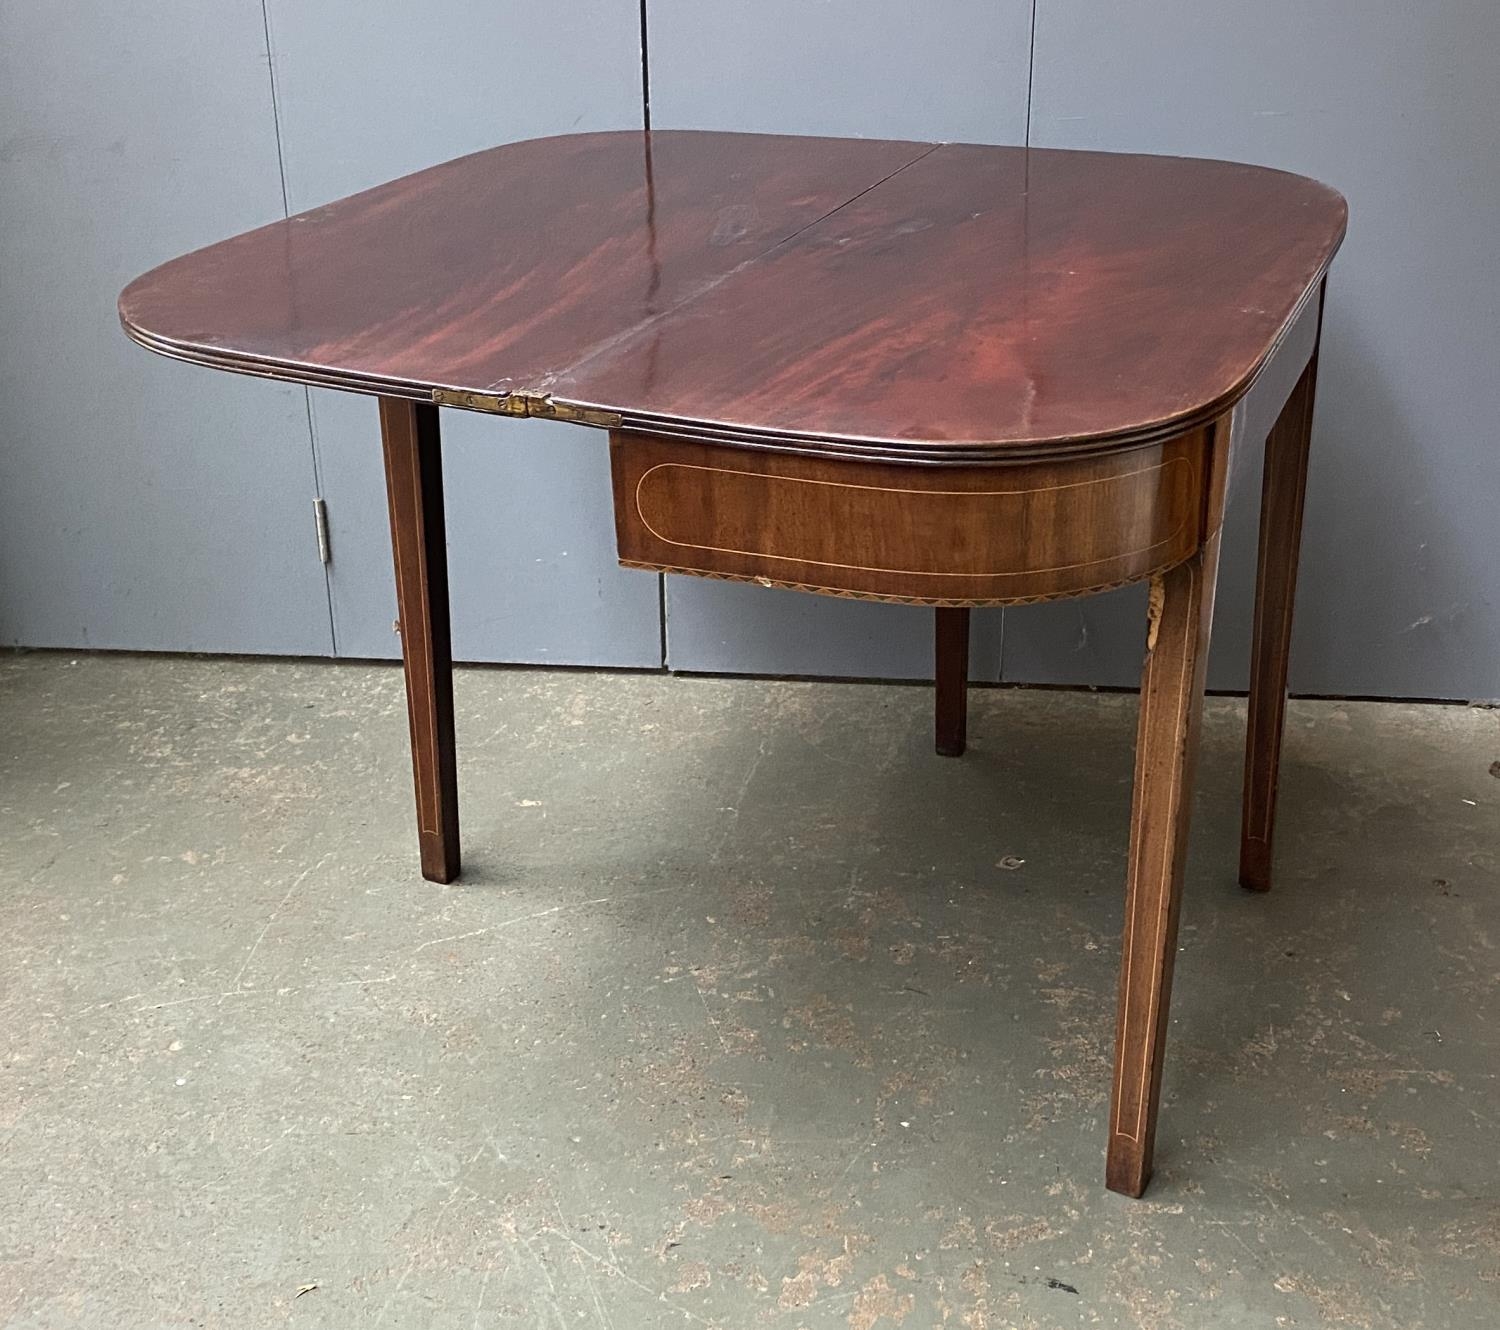 A George III mahogany and line inlaid tea table, on square tapered legs, 91x45x73cmH - Image 2 of 2